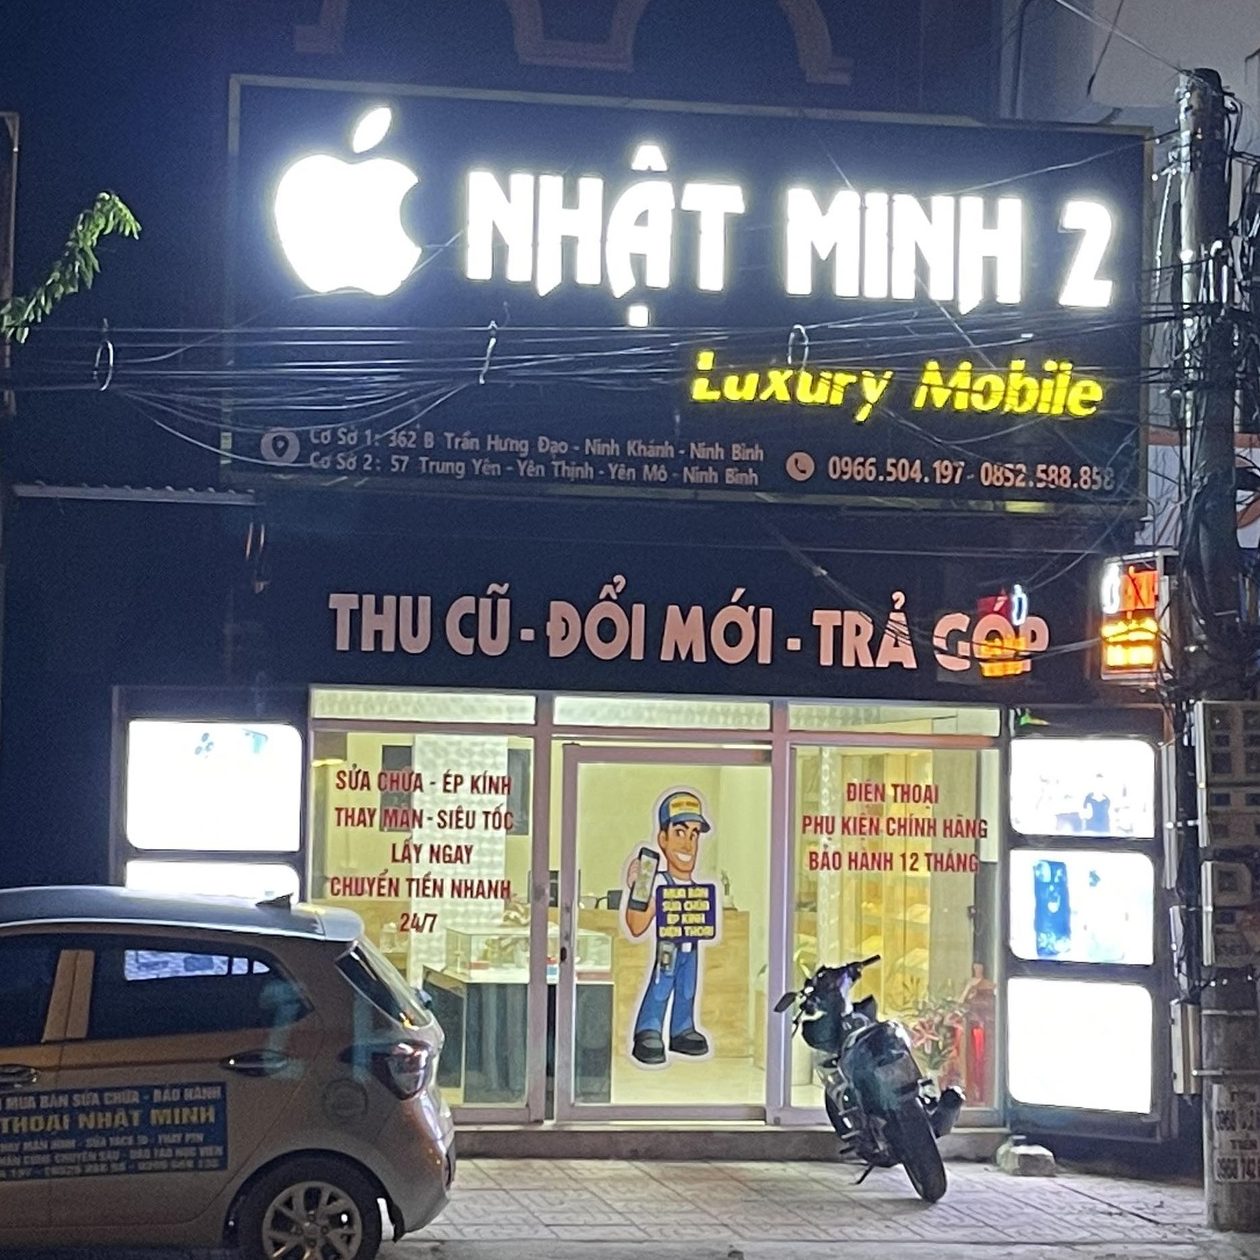 Nhat Minh Luxury Mobile edited